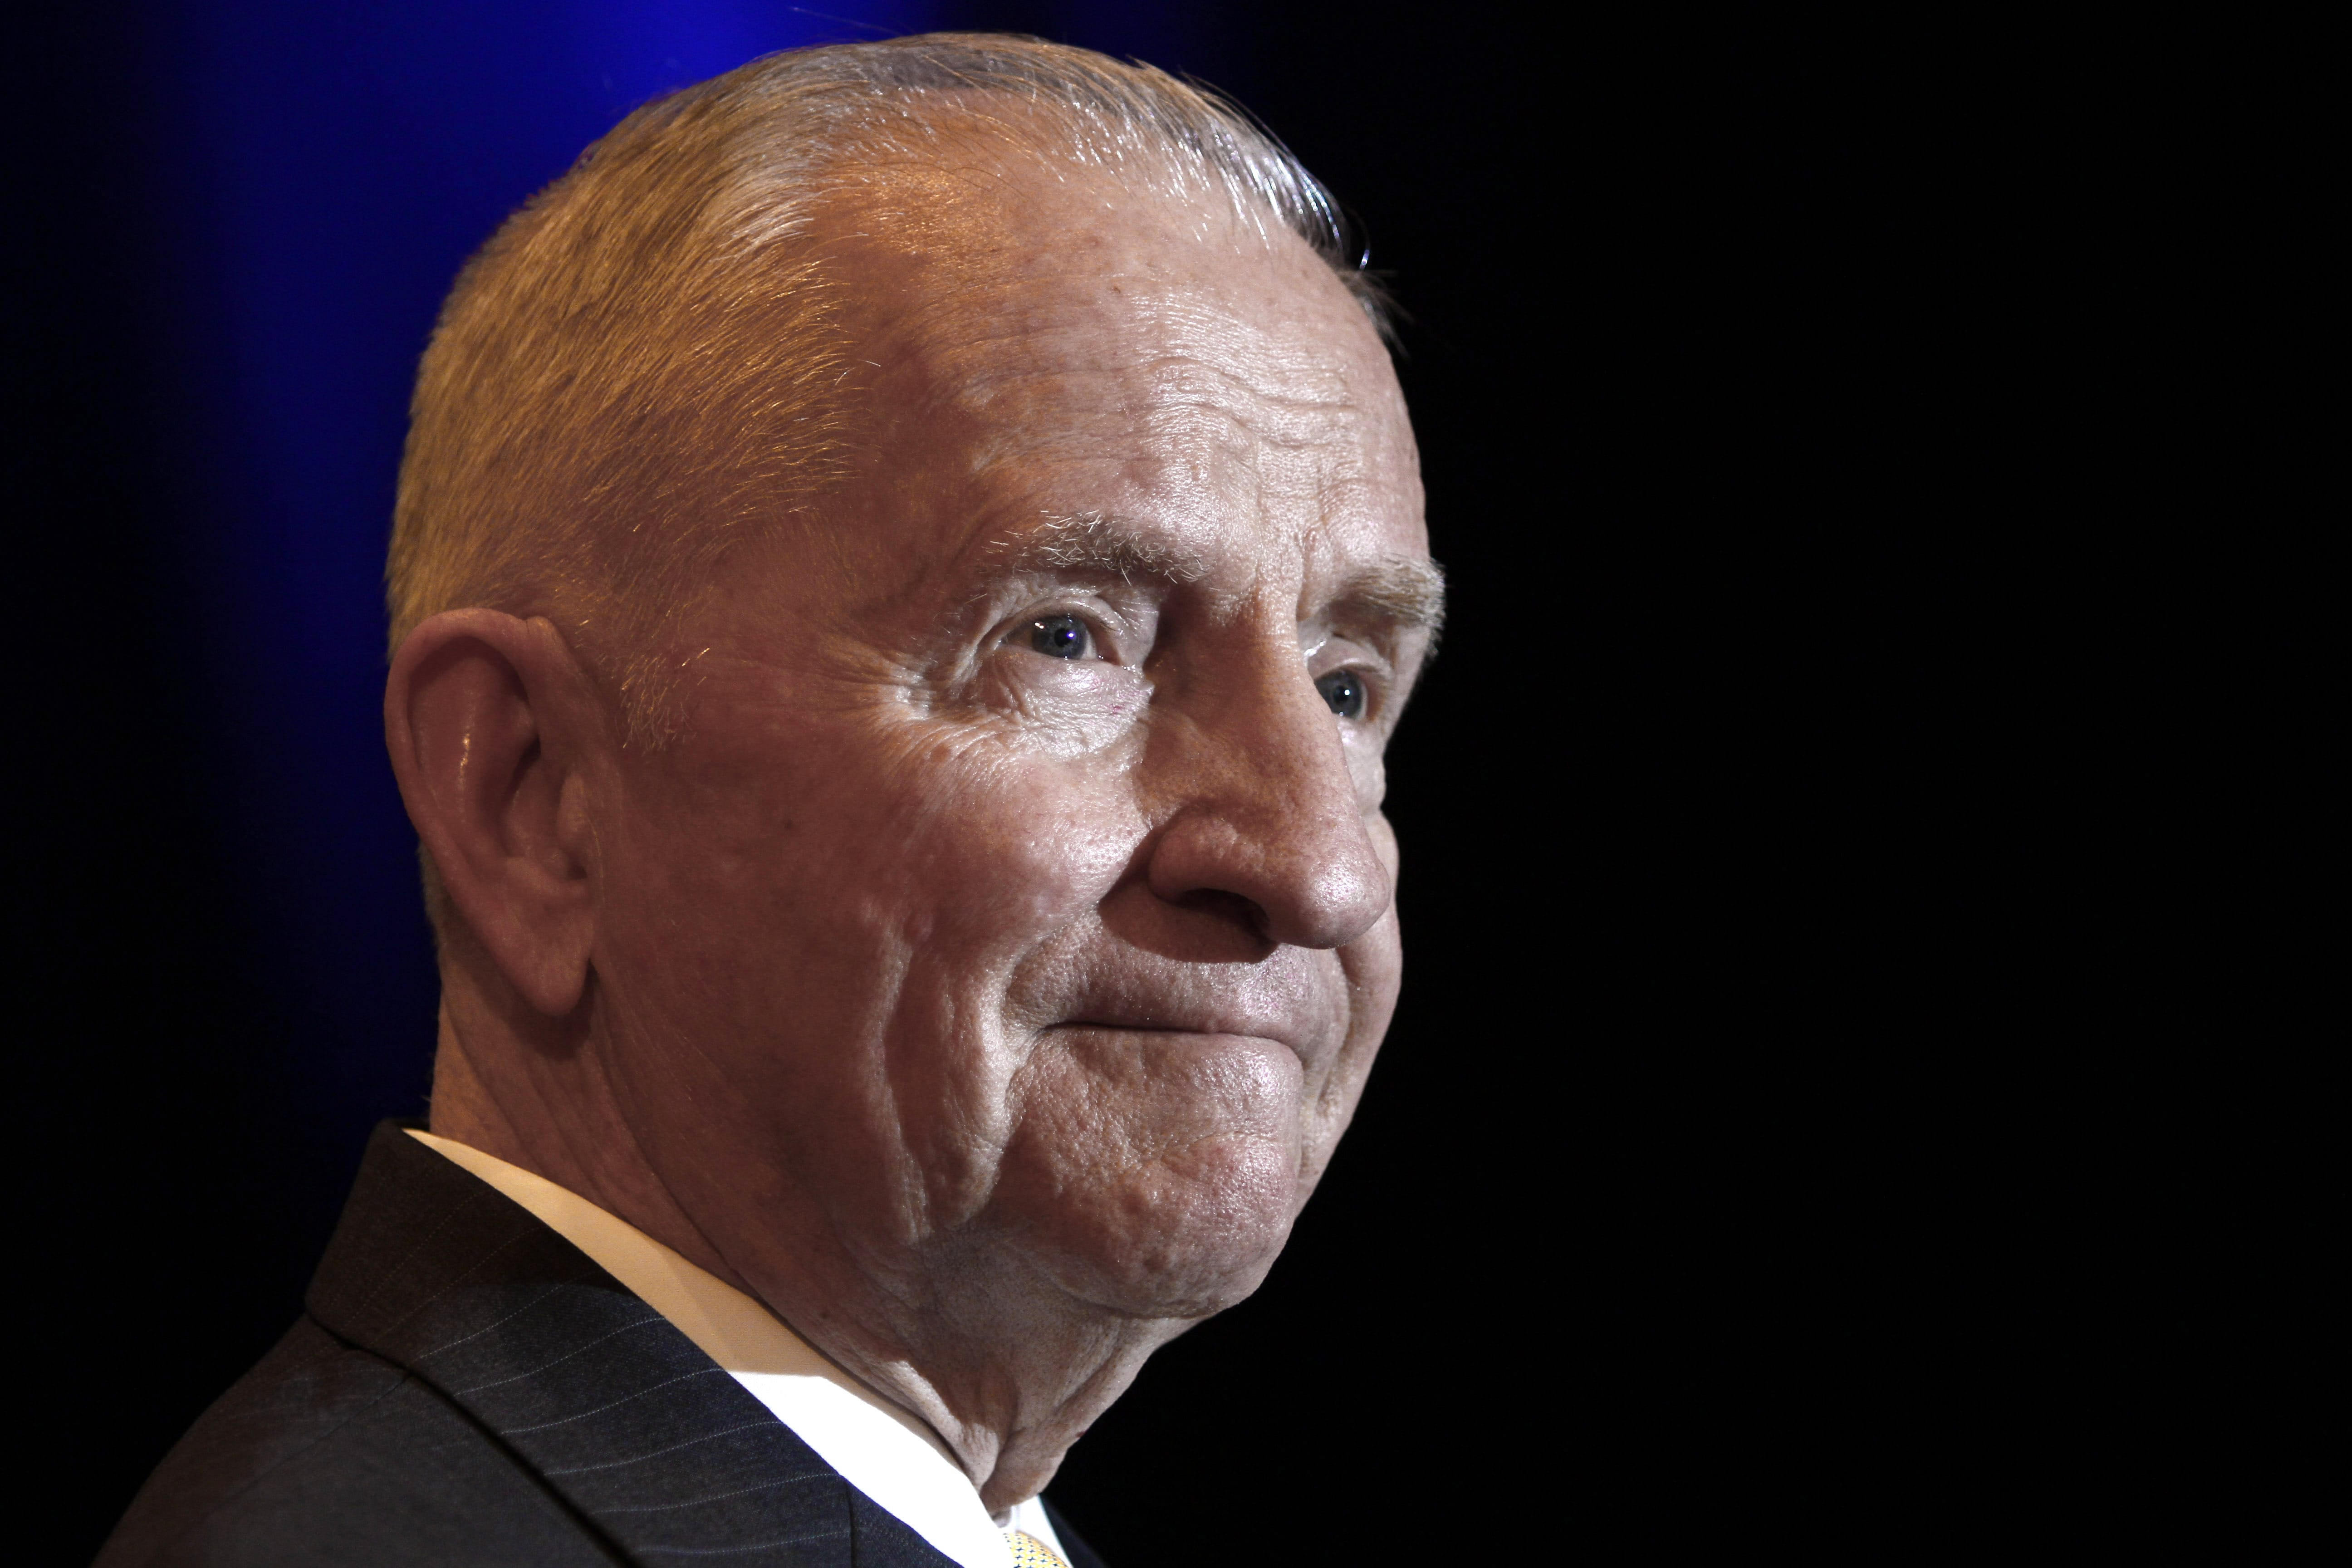 FILE - In this April 20, 2019, file photo, Ross Perot listens to a reporter's question during a news conference before accepting the Command and General Staff College Foundation's 2010 Distinguished Leadership Award in Kansas City, Mo. Perot, the Texas billionaire who twice ran for president, has died, a family spokesperson said Tuesday, July 9, 2019. He was 89.